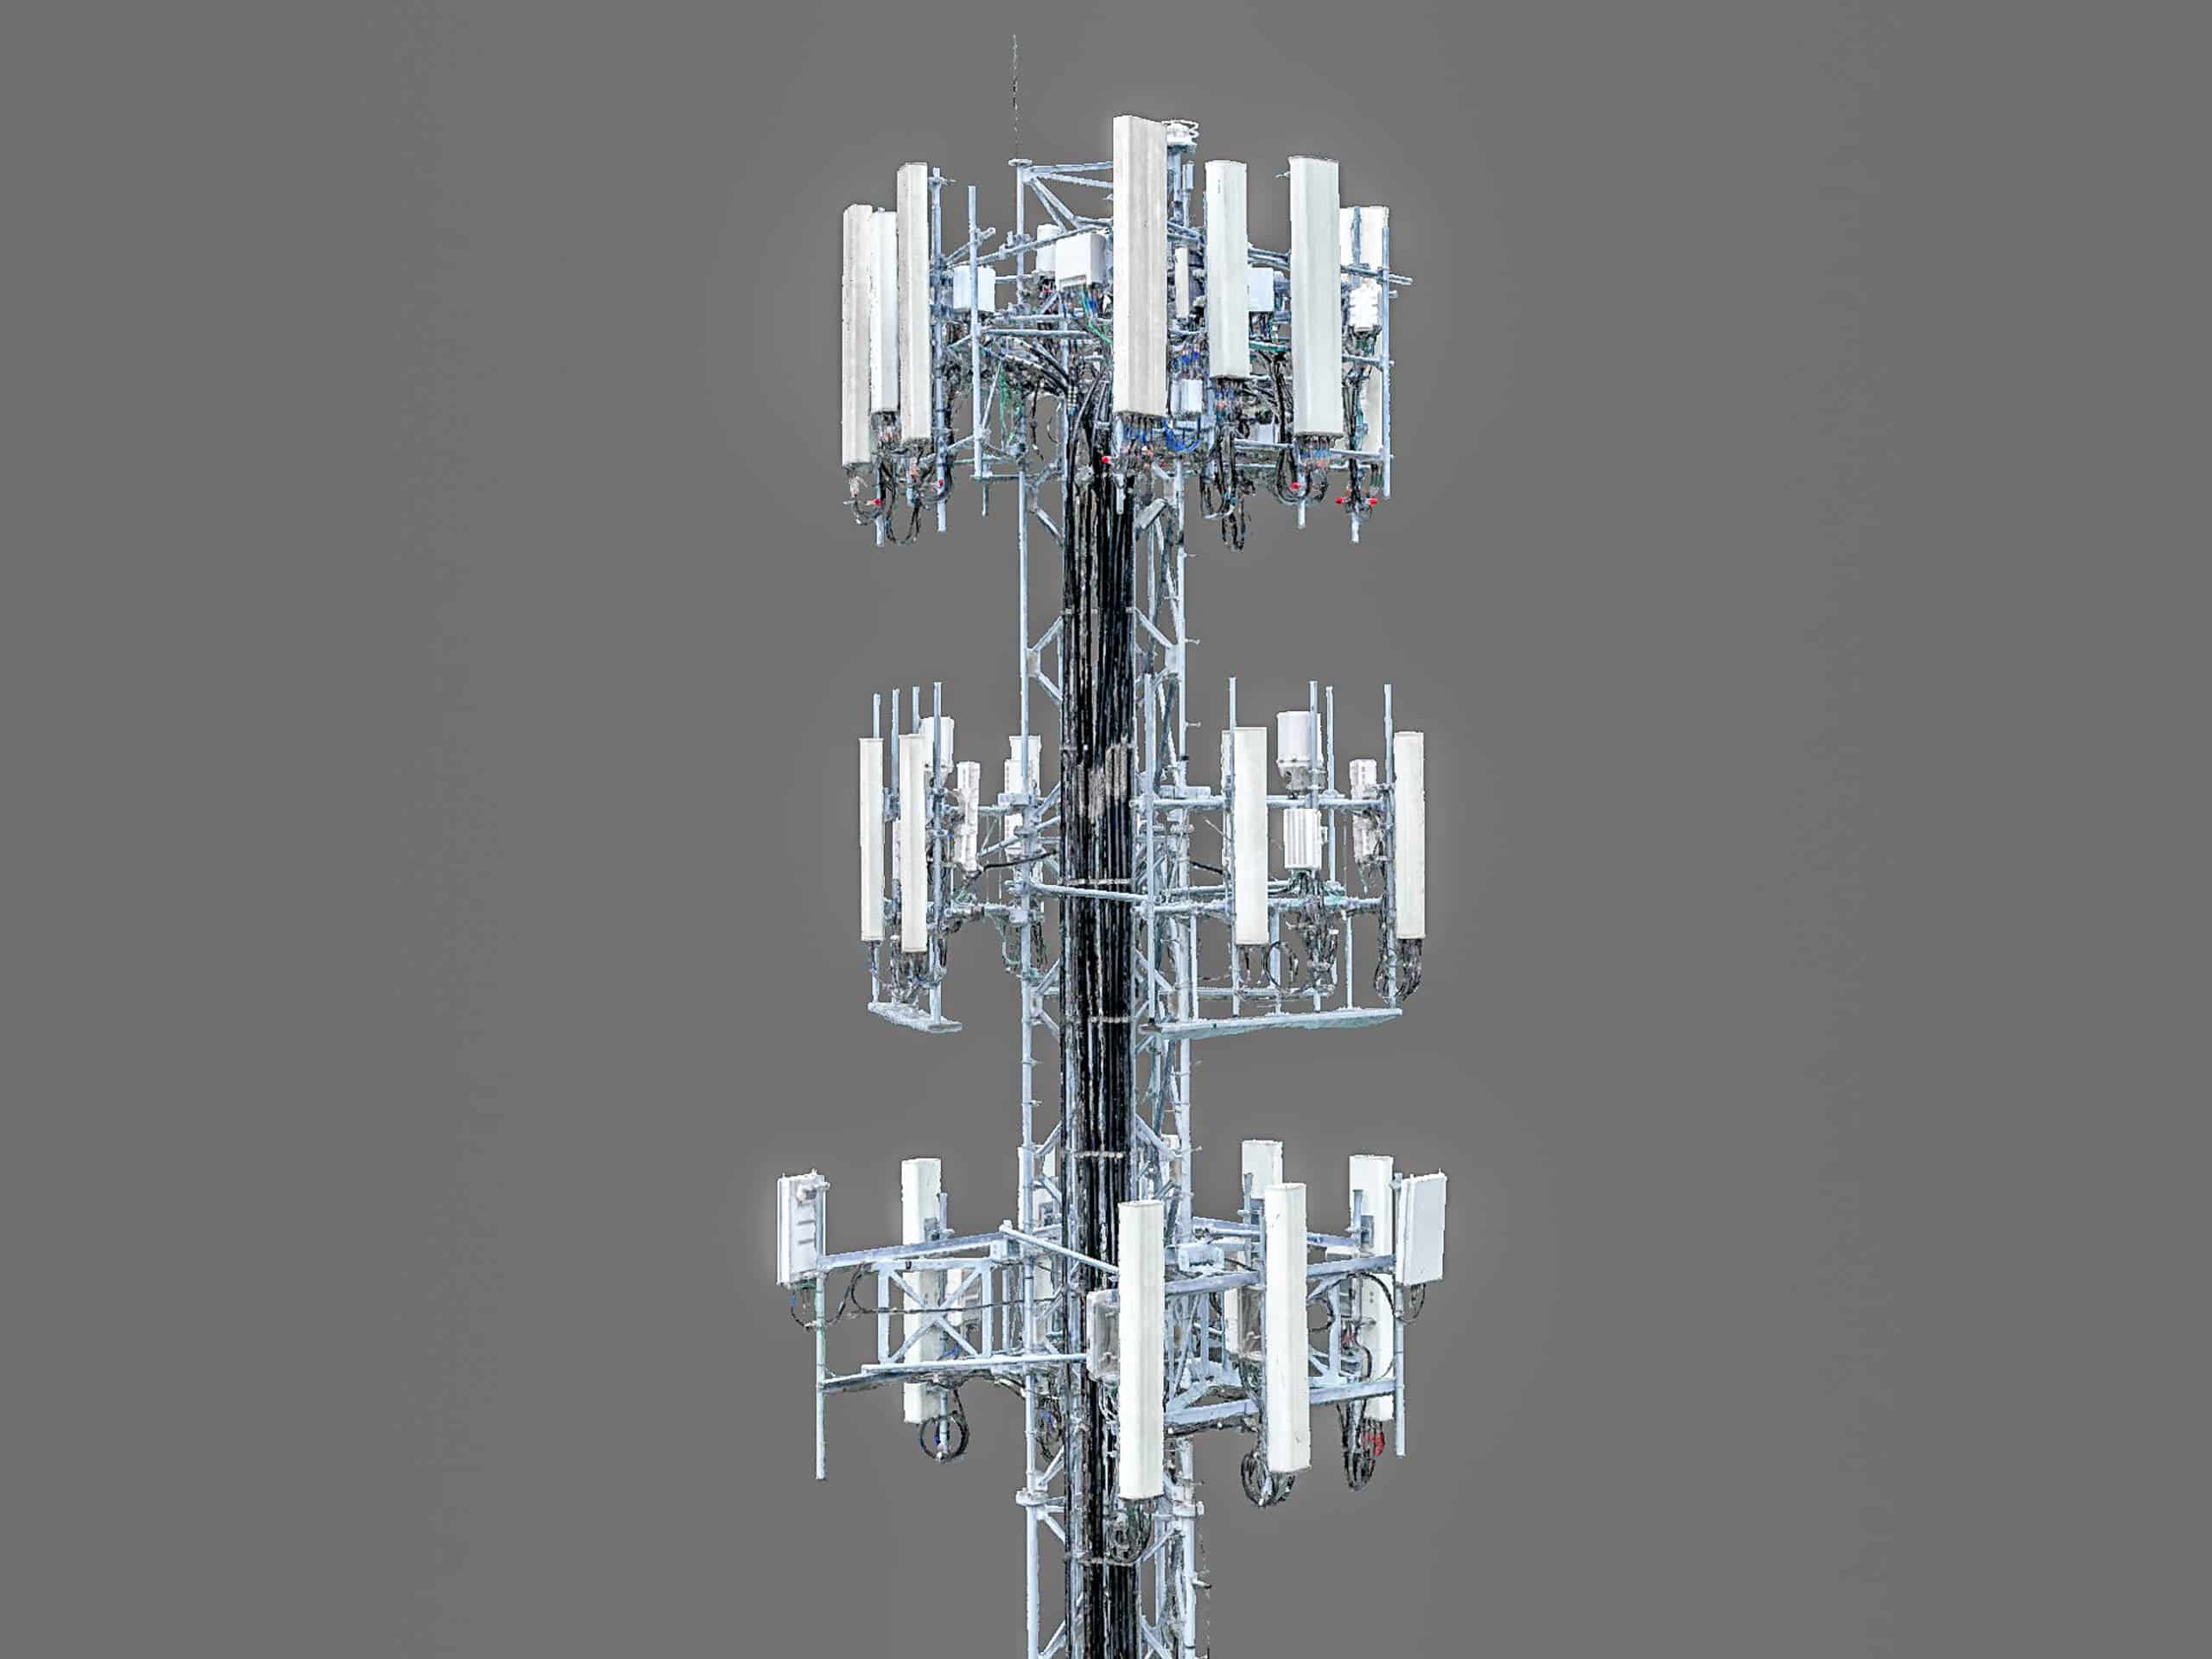 Aerial 3D model of a cell tower with antennas and intricate wire network, captured by UA-Visions' drone technology.